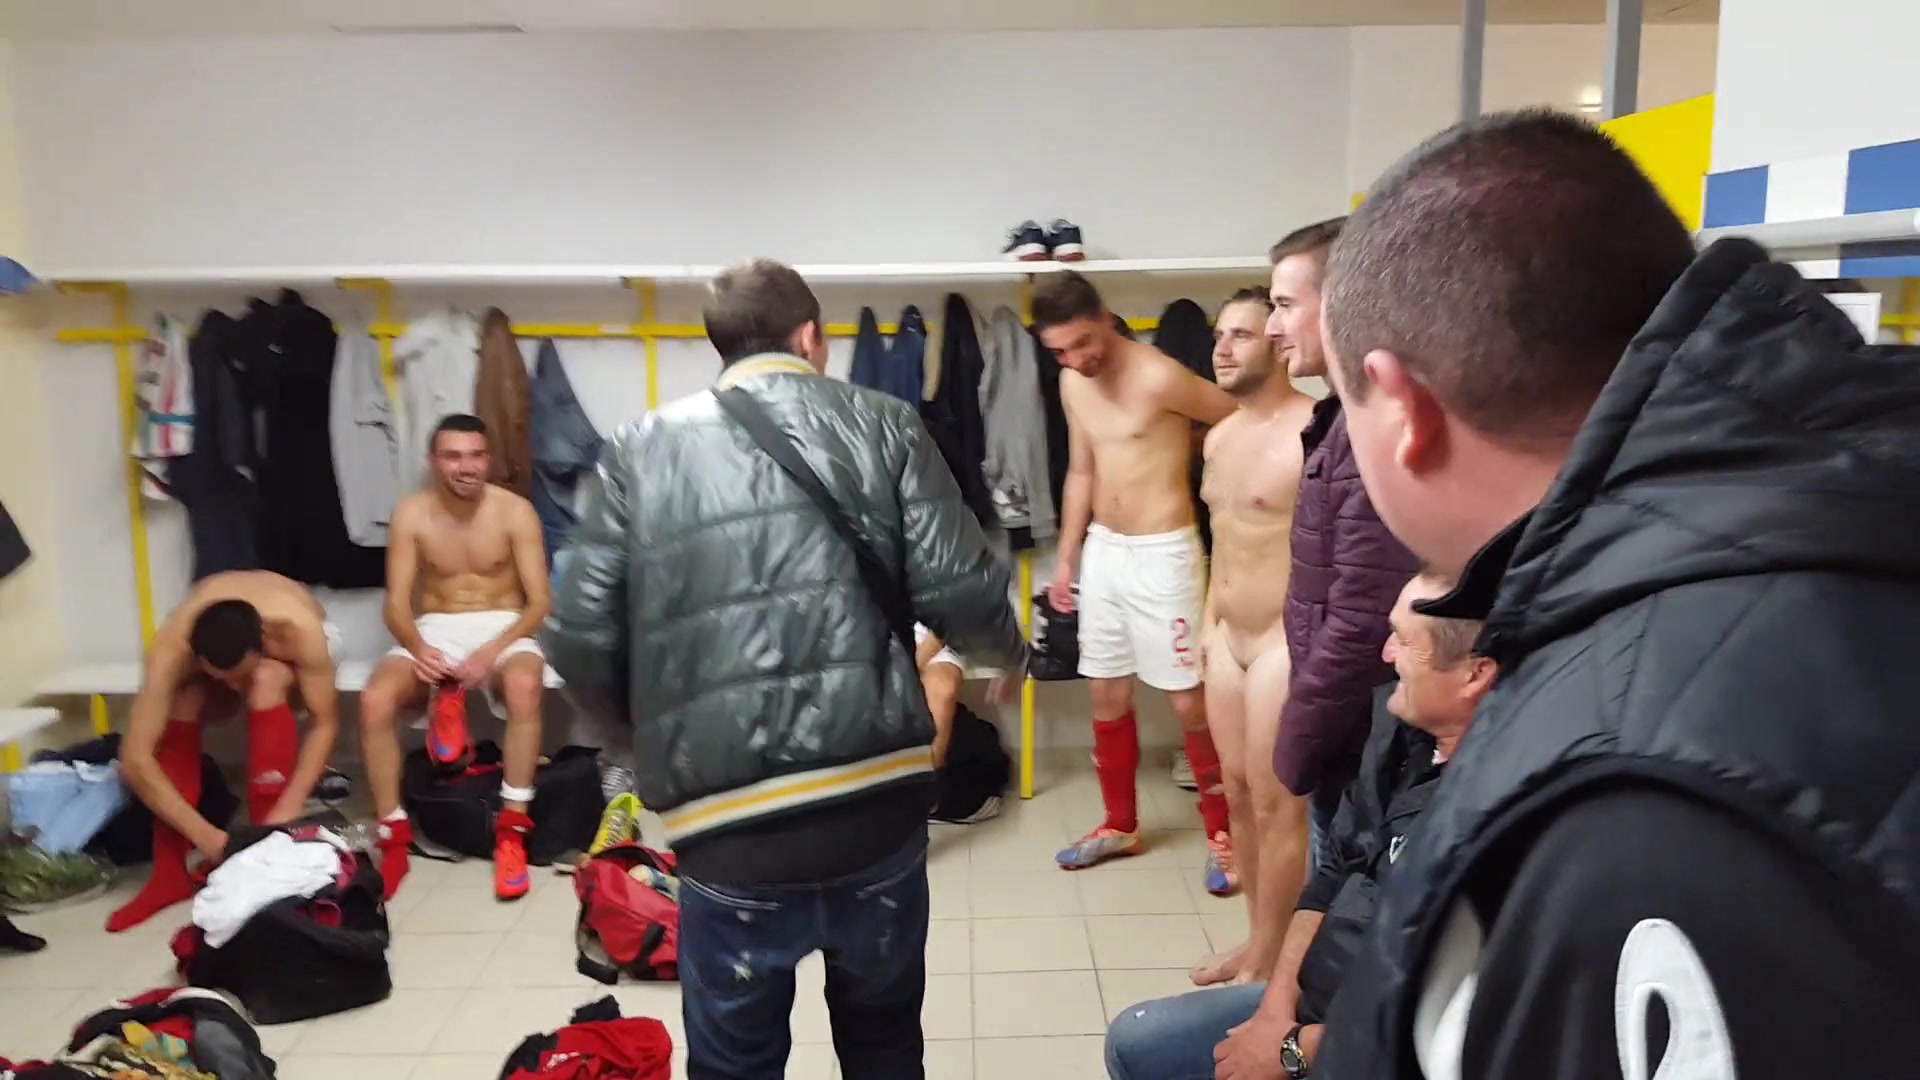 Footballers changing room naked photo